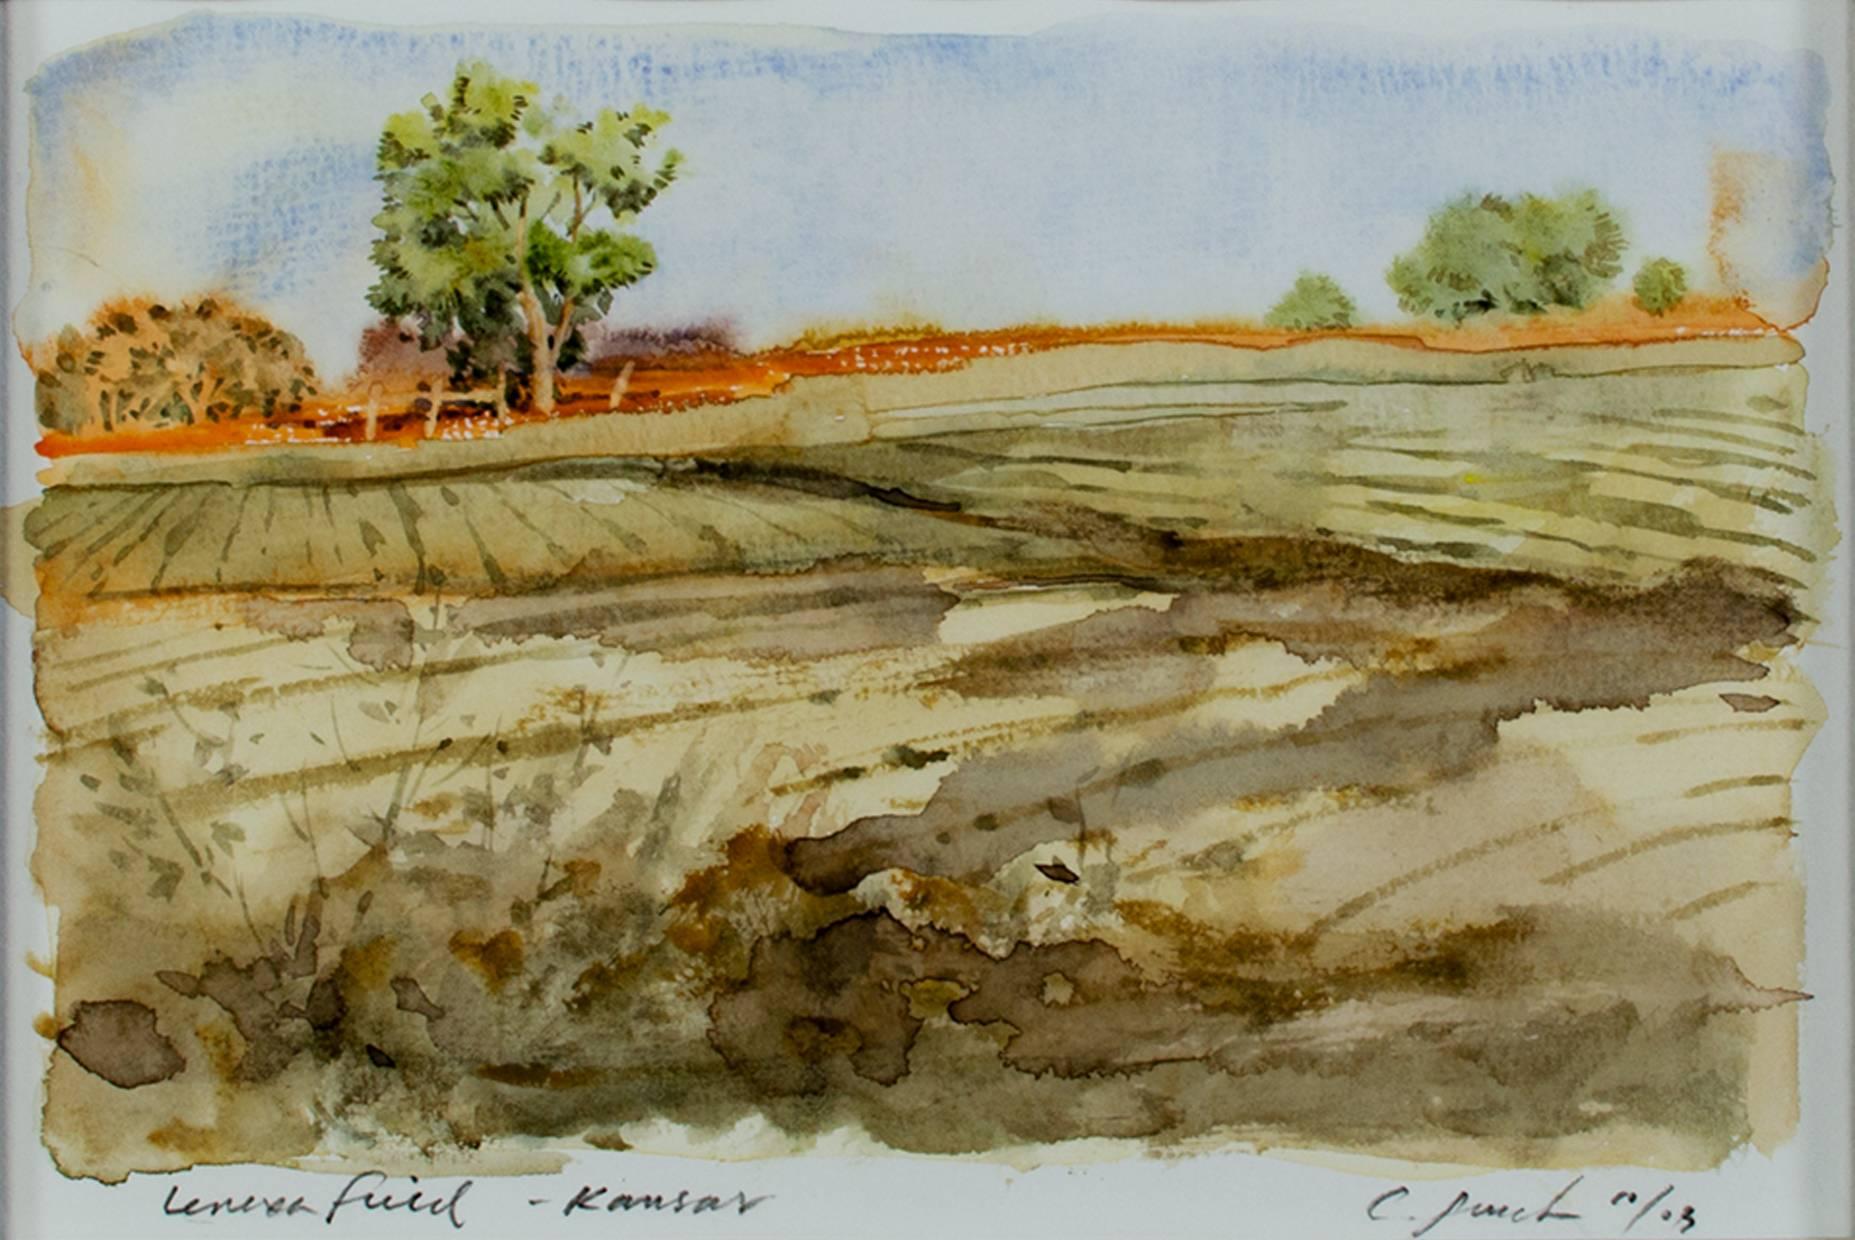 "Lenexa Field, Kansas" is an original watercolor painting on Holbein watercolor paper. The artist, Craig Lueck, signed the piece in the lower right and titled it in the lower left in pencil. These petite watercolors that make up Lueck's portfolio